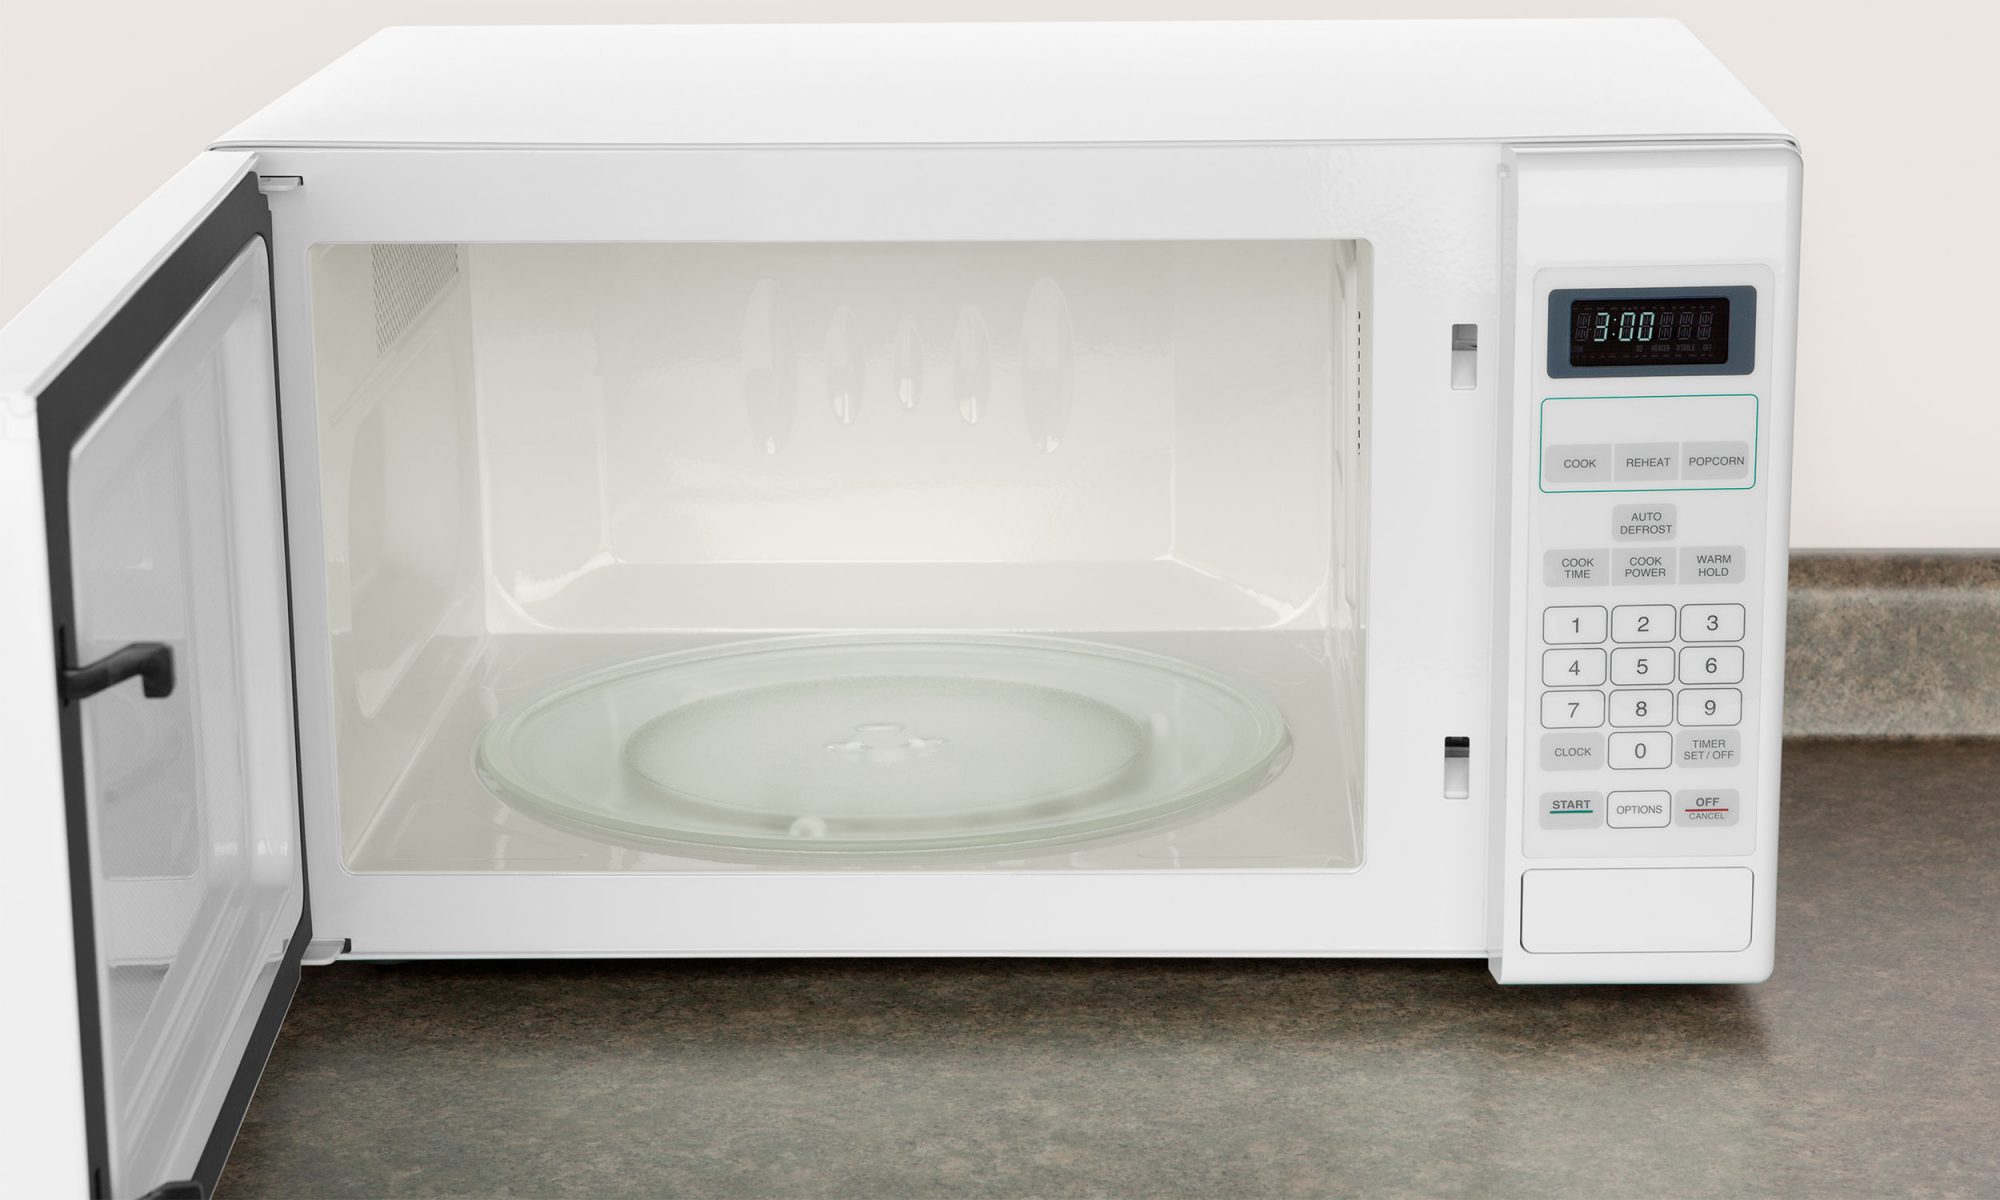 Food Will Taste Better if You Clean Your Microwave